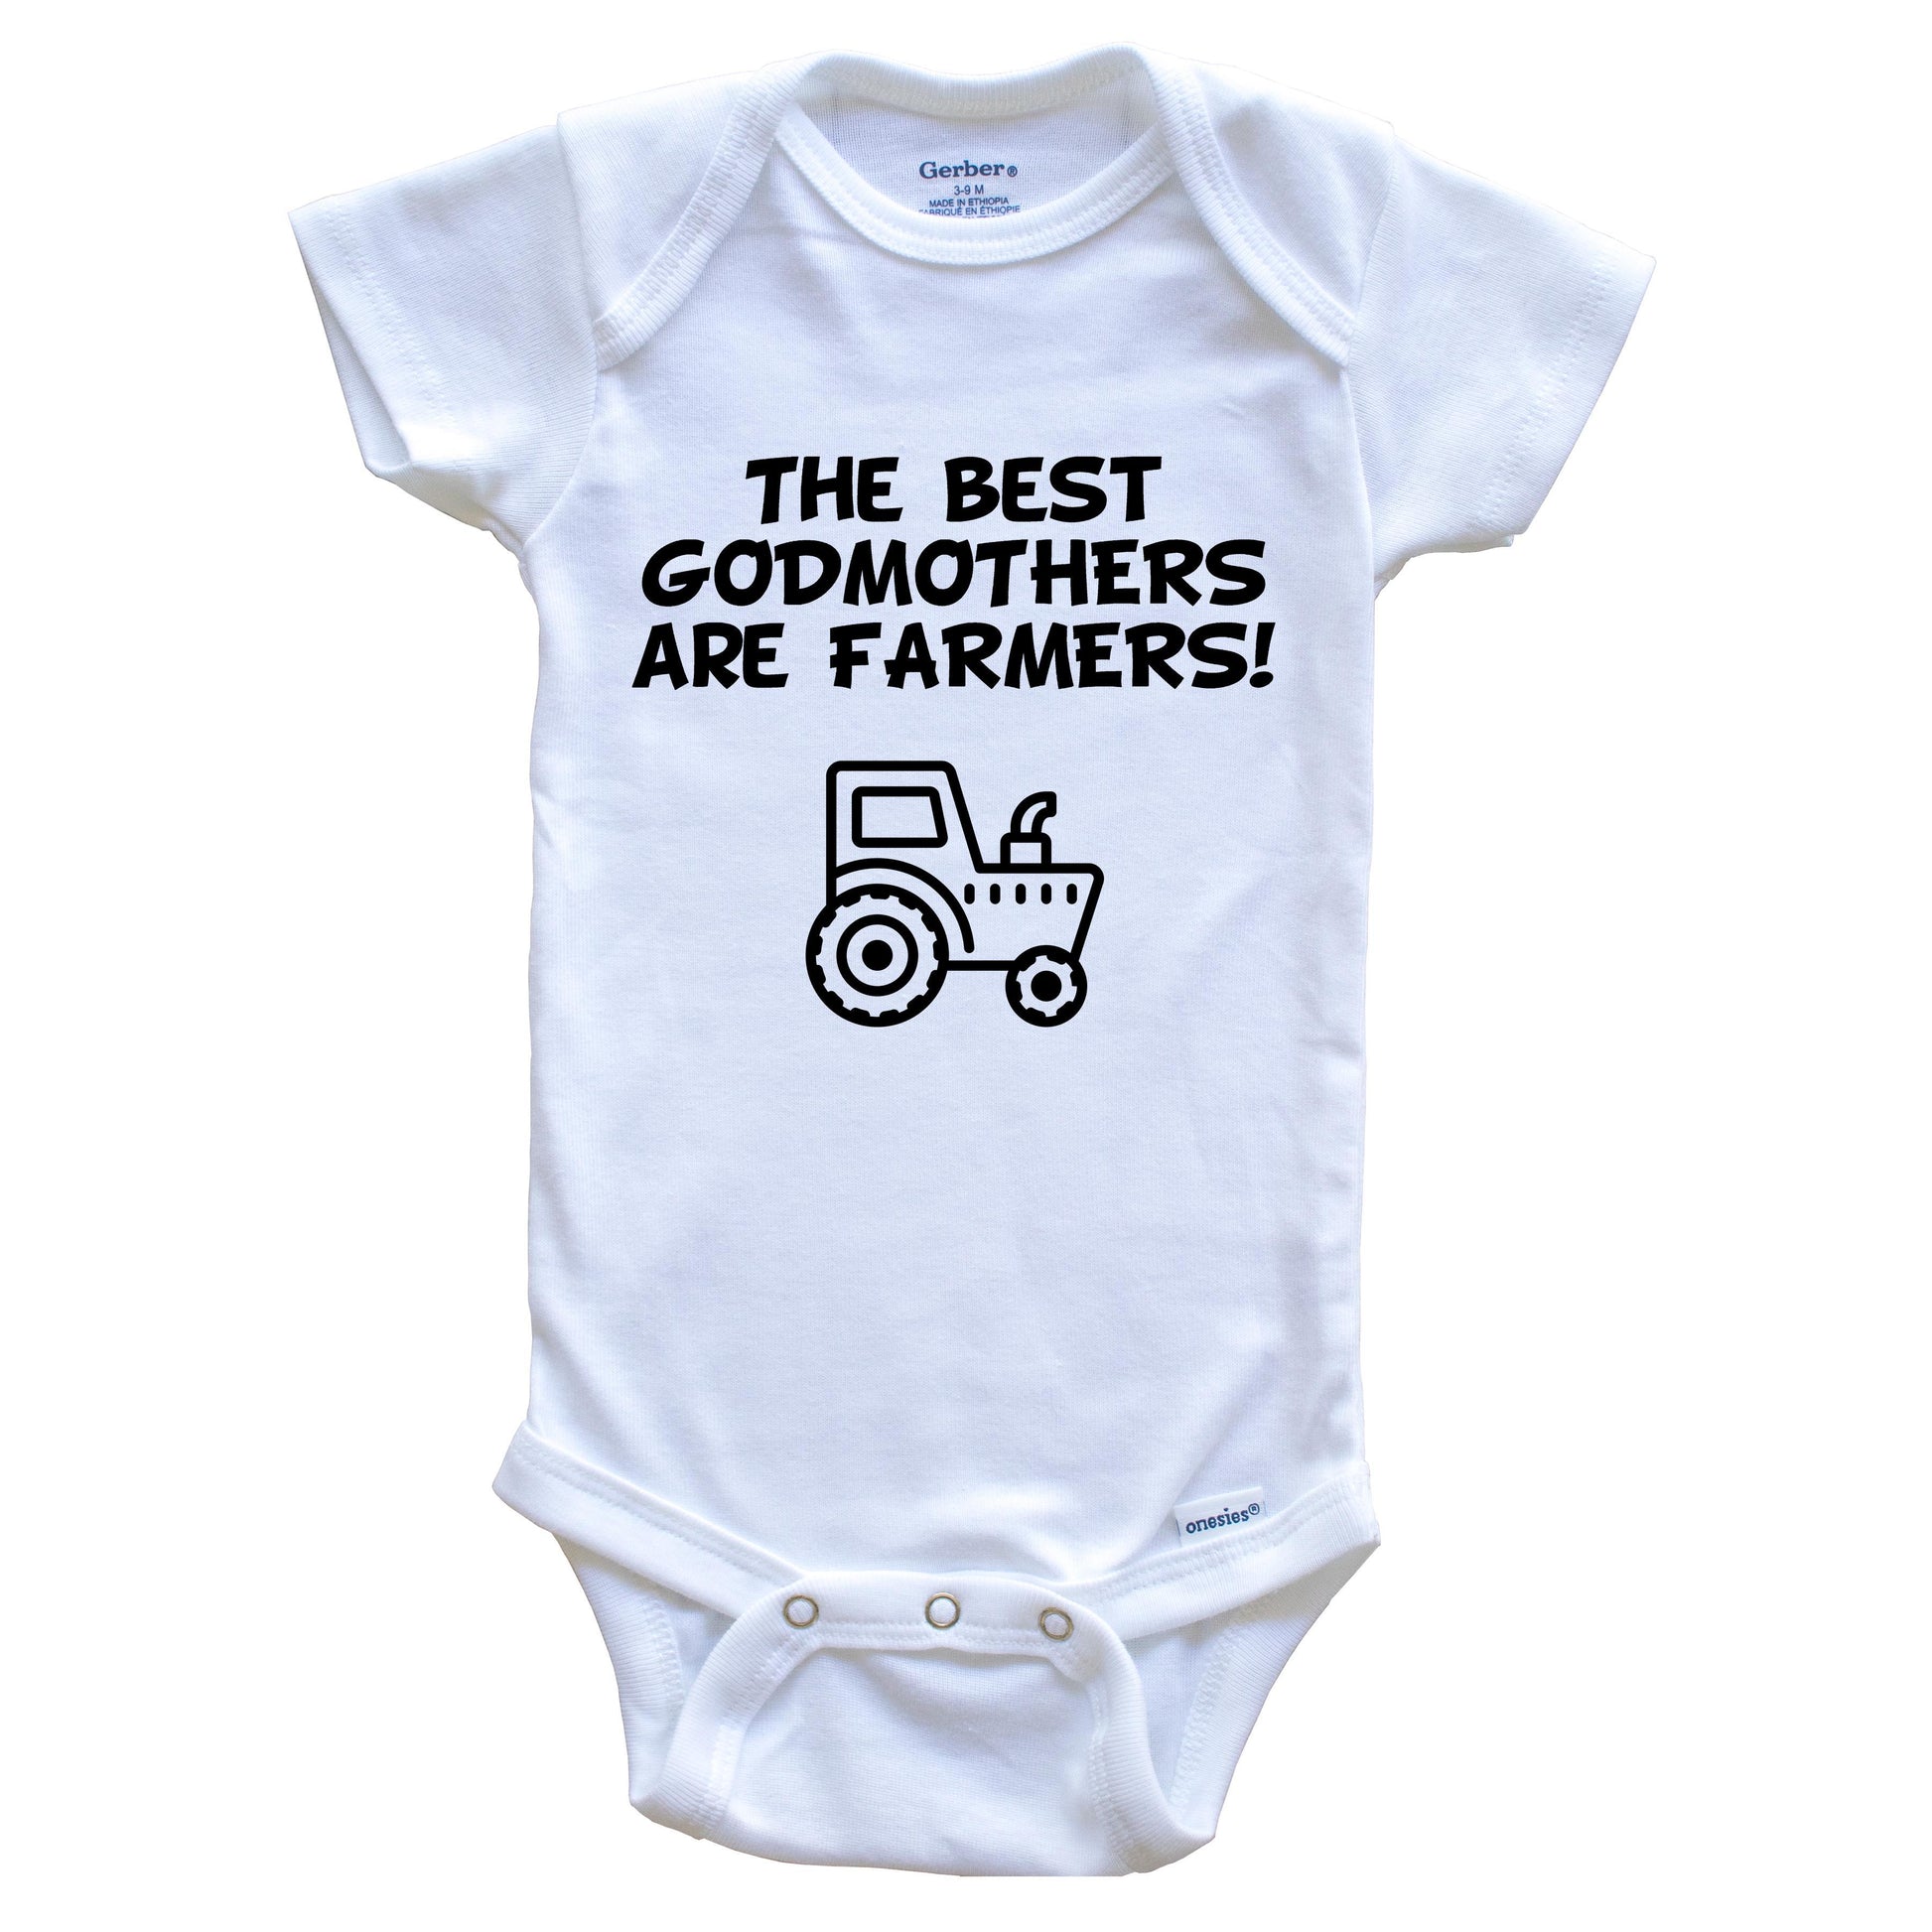 The Best Godmothers Are Farmers Funny Godchild Baby Onesie